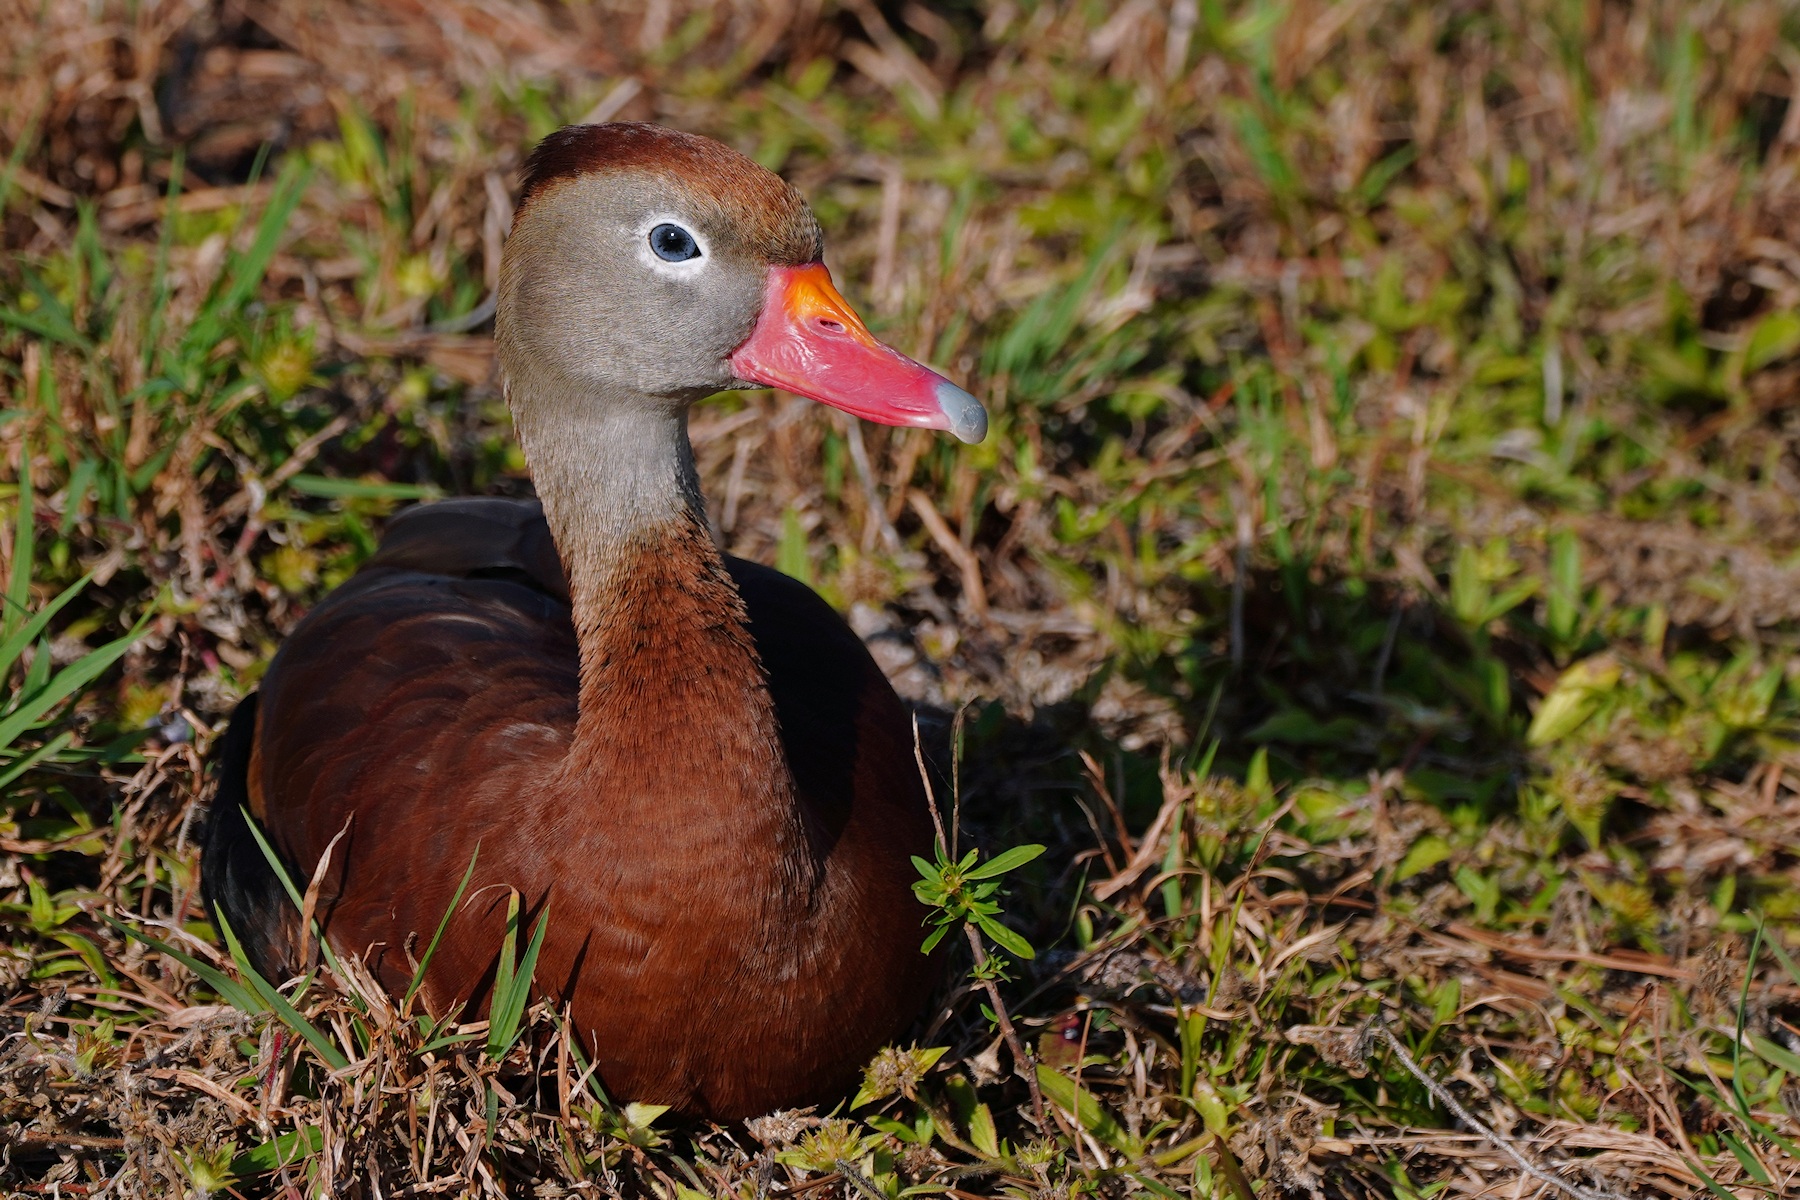 Black-bellied whistling duck - blue-eyed son